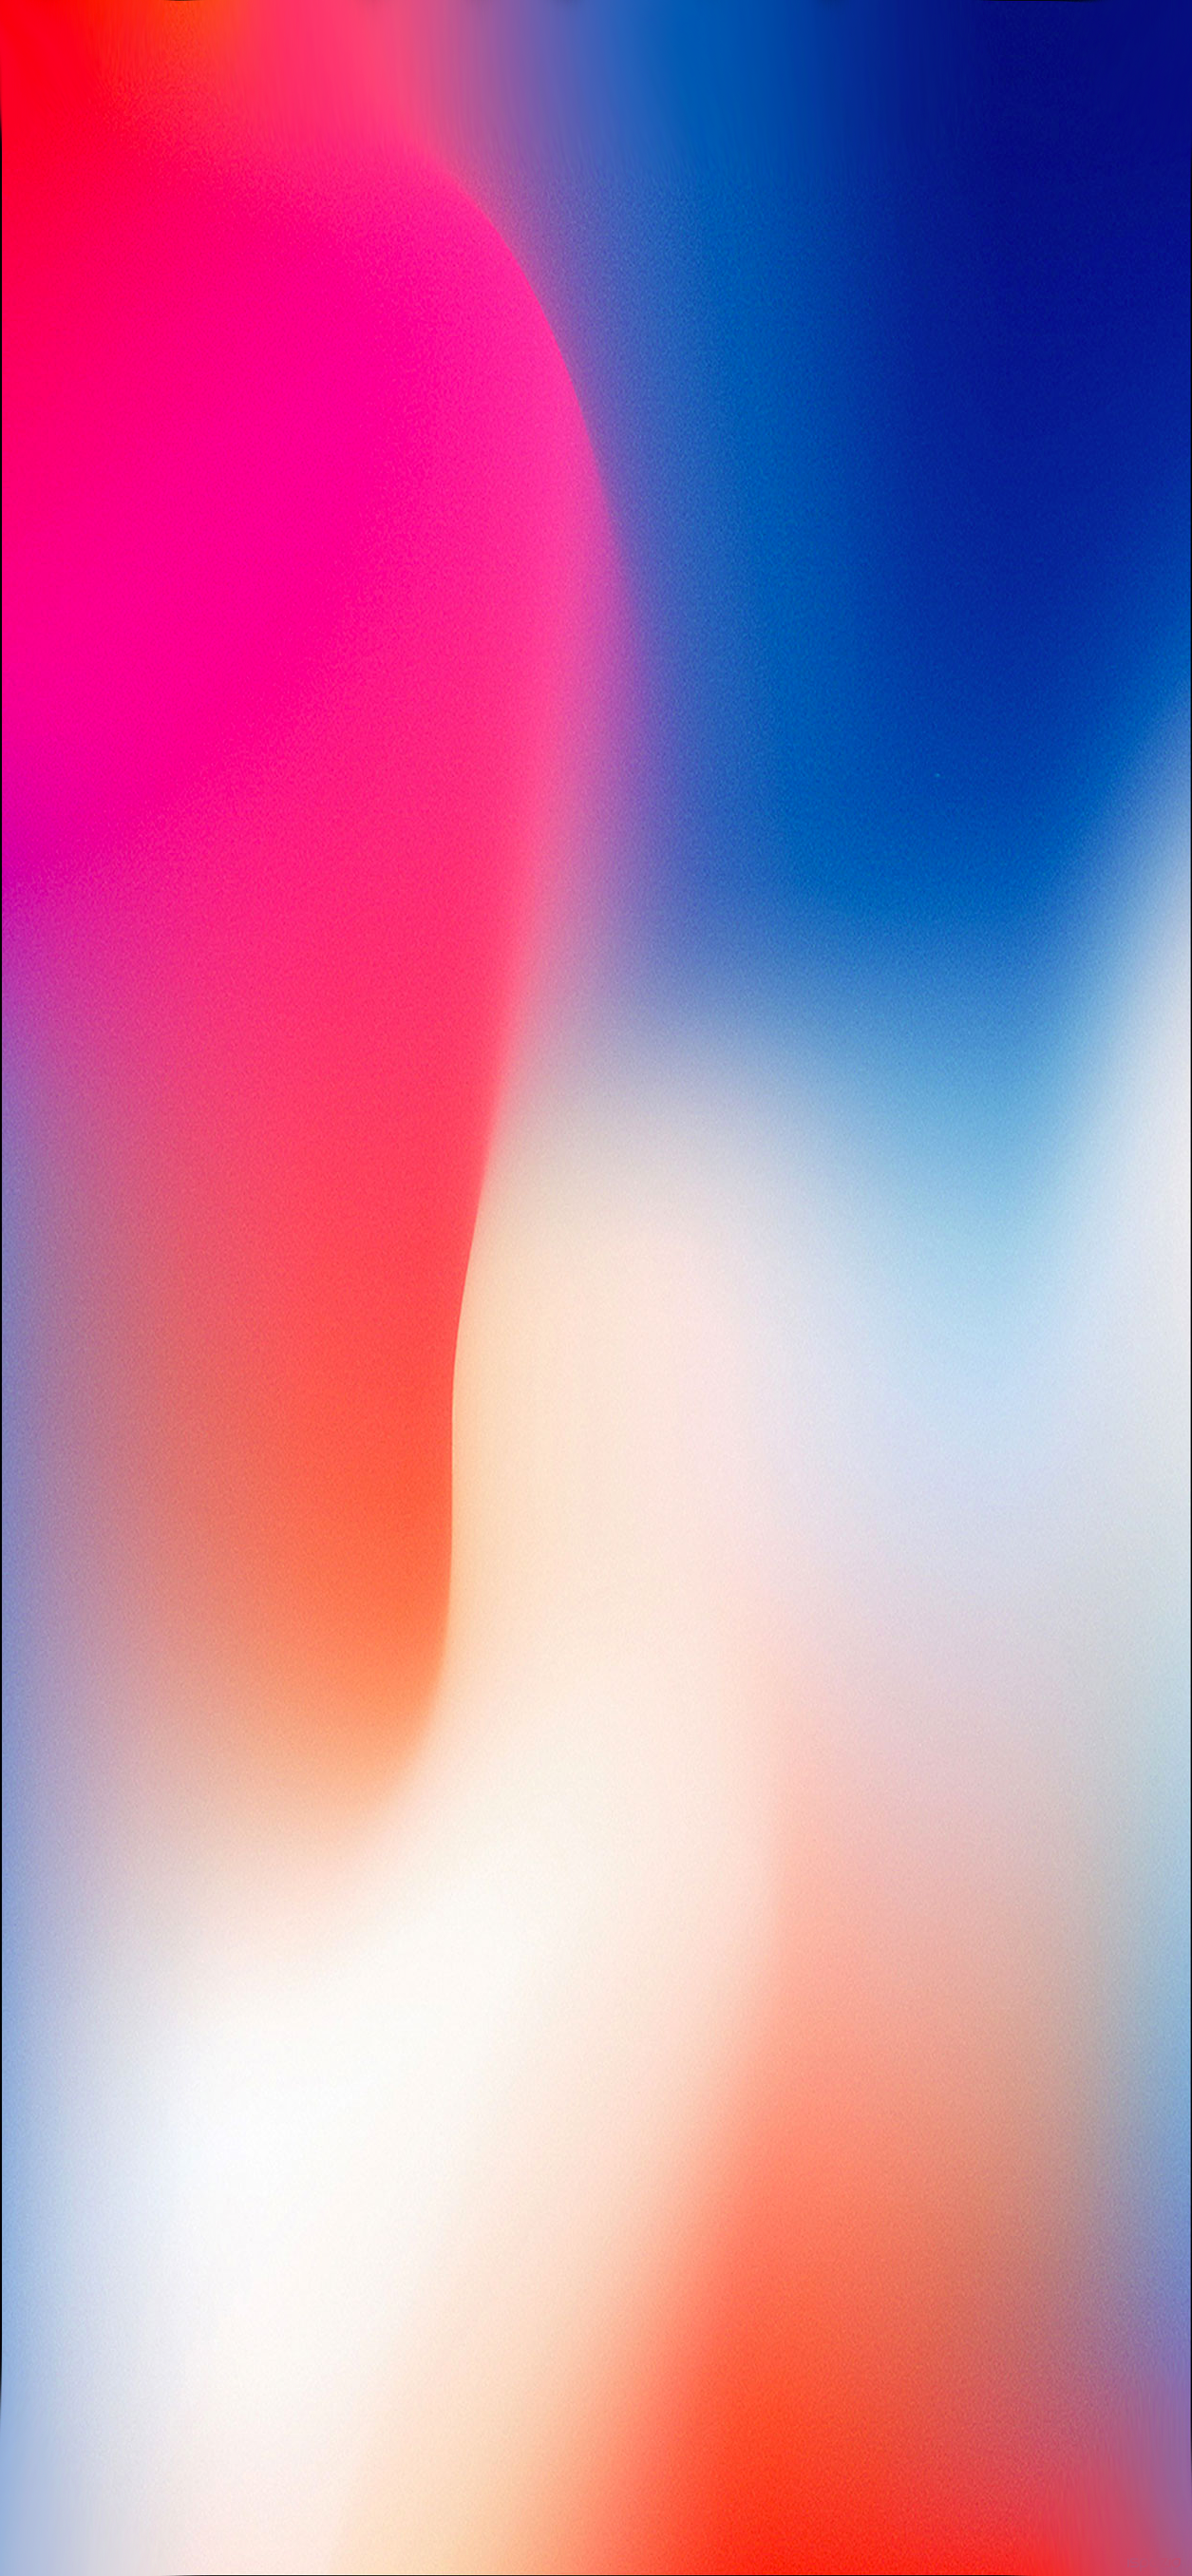 Download iPhone 8 Stock Wallpapers (44 Wallpapers) - DroidViews